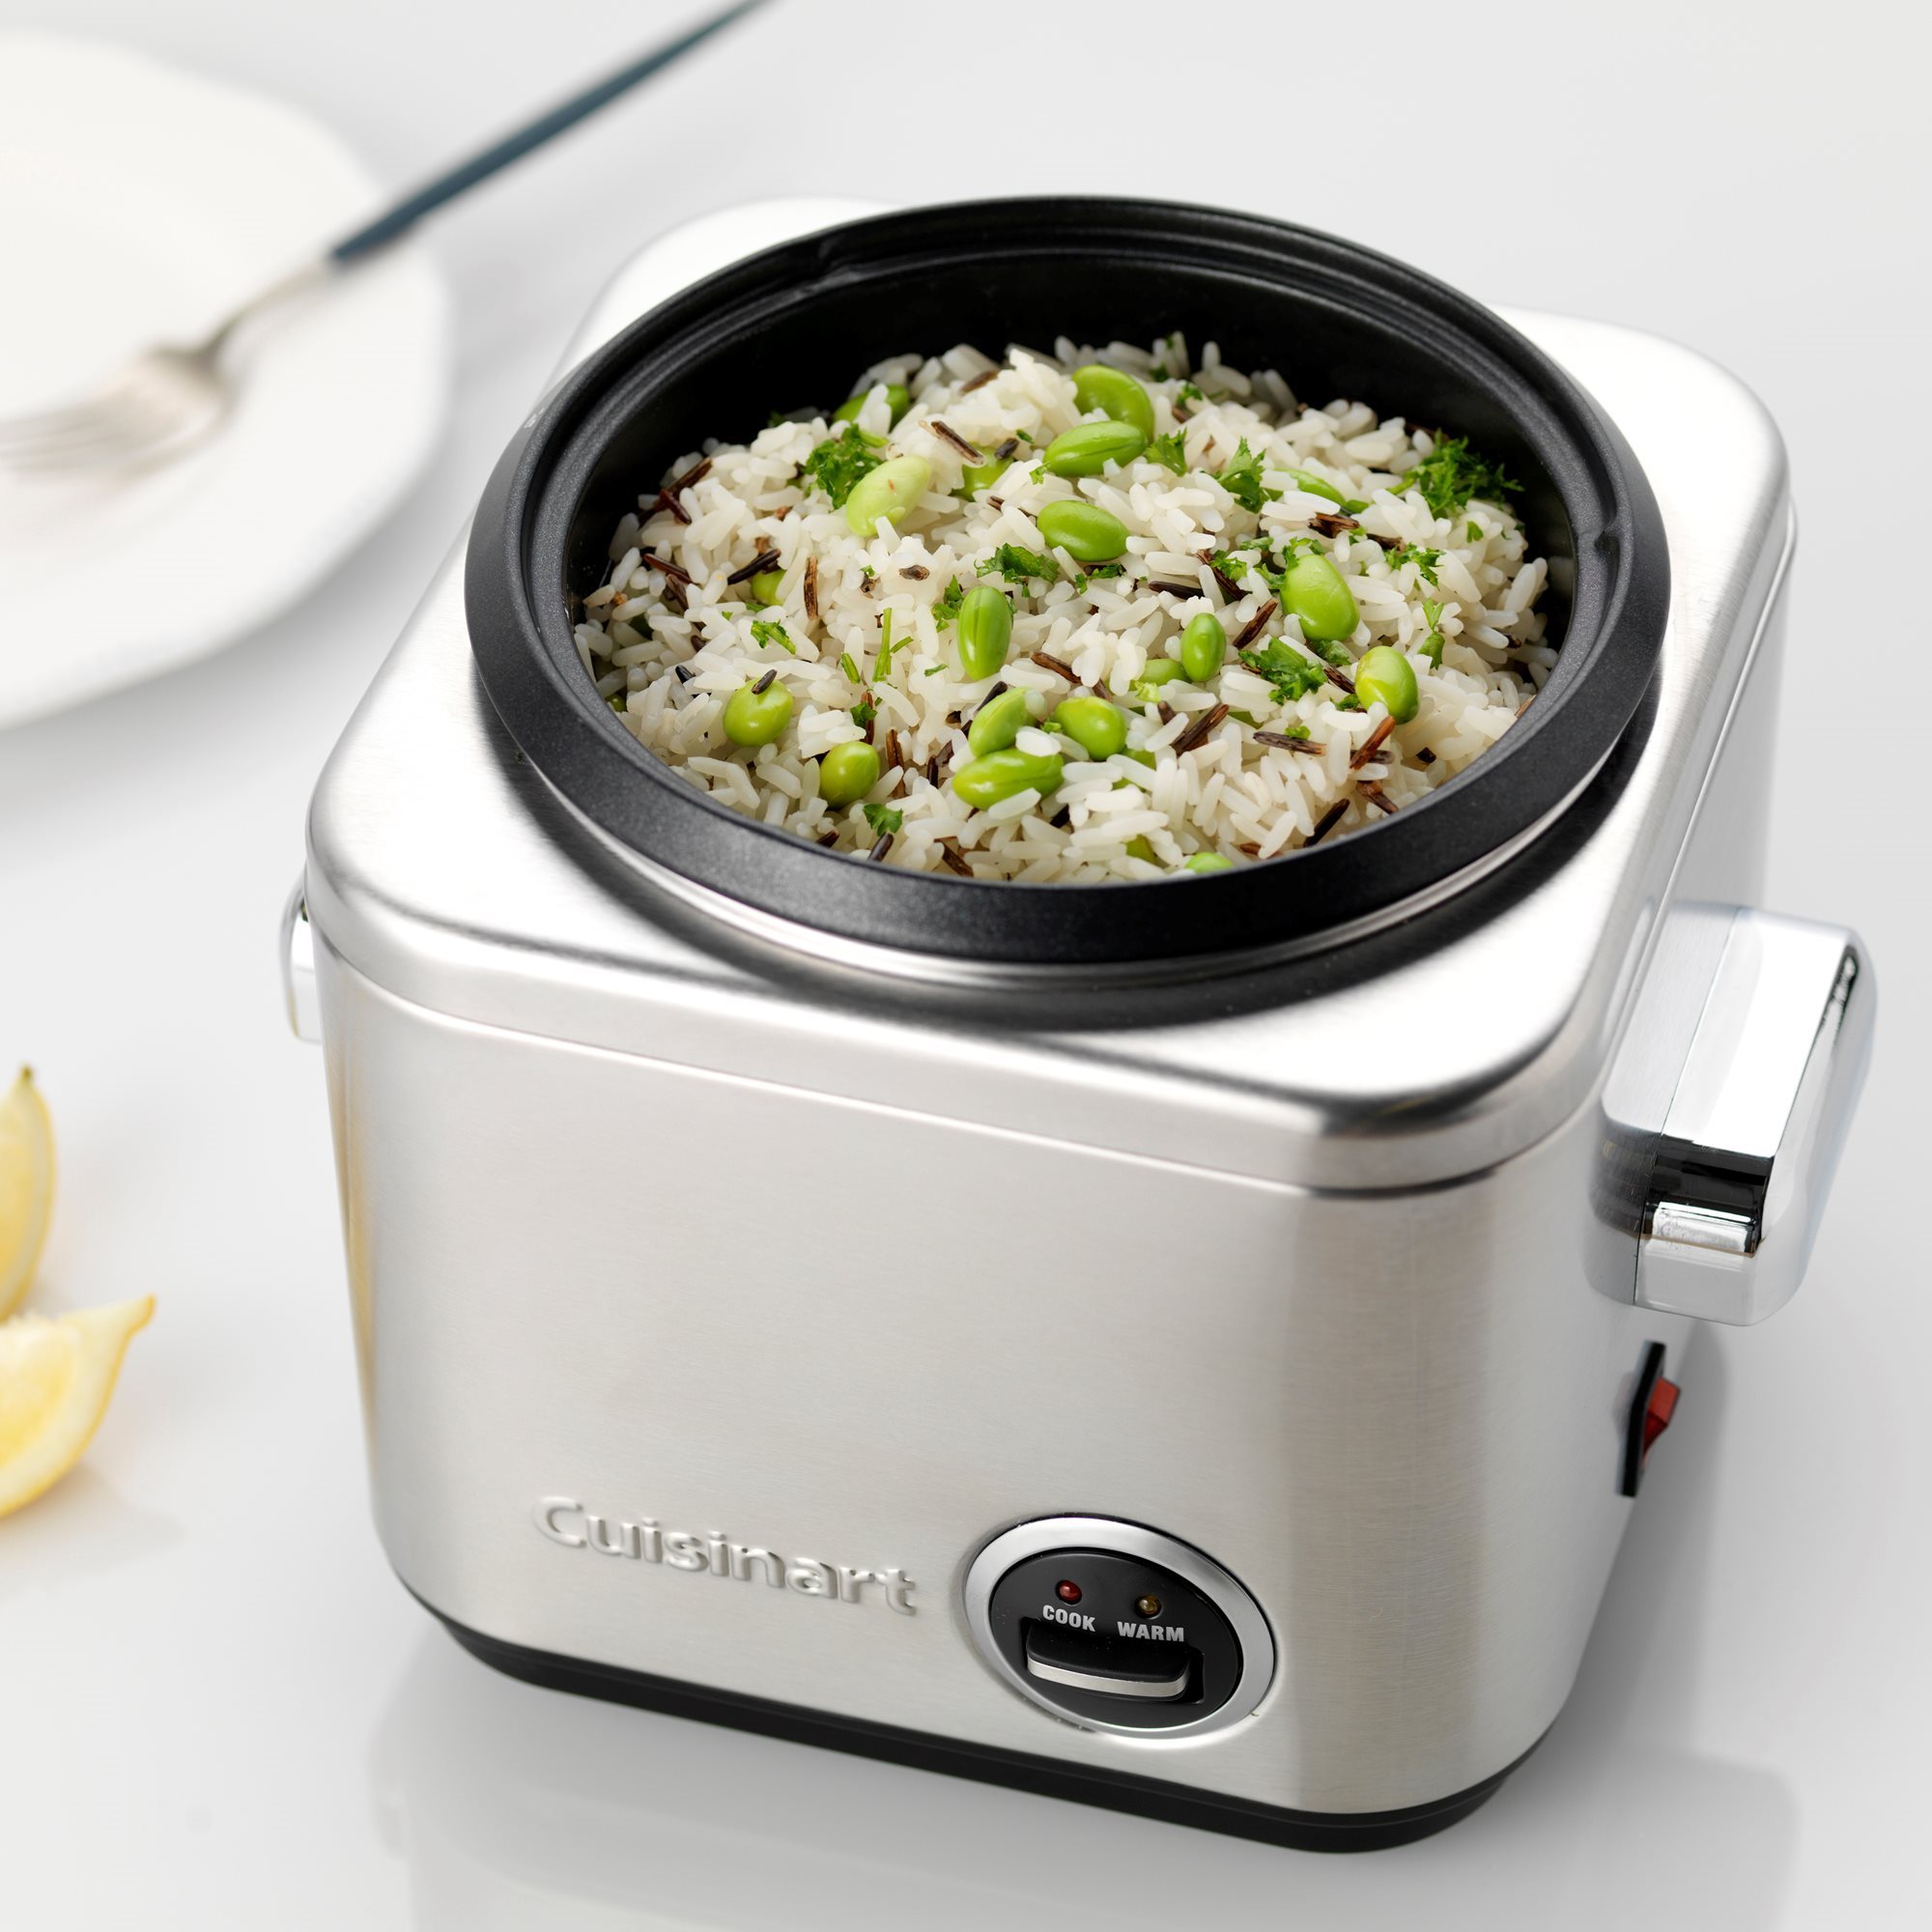 Electric cooking pot for rice, 1.4 L, 650 W - Cuisinart